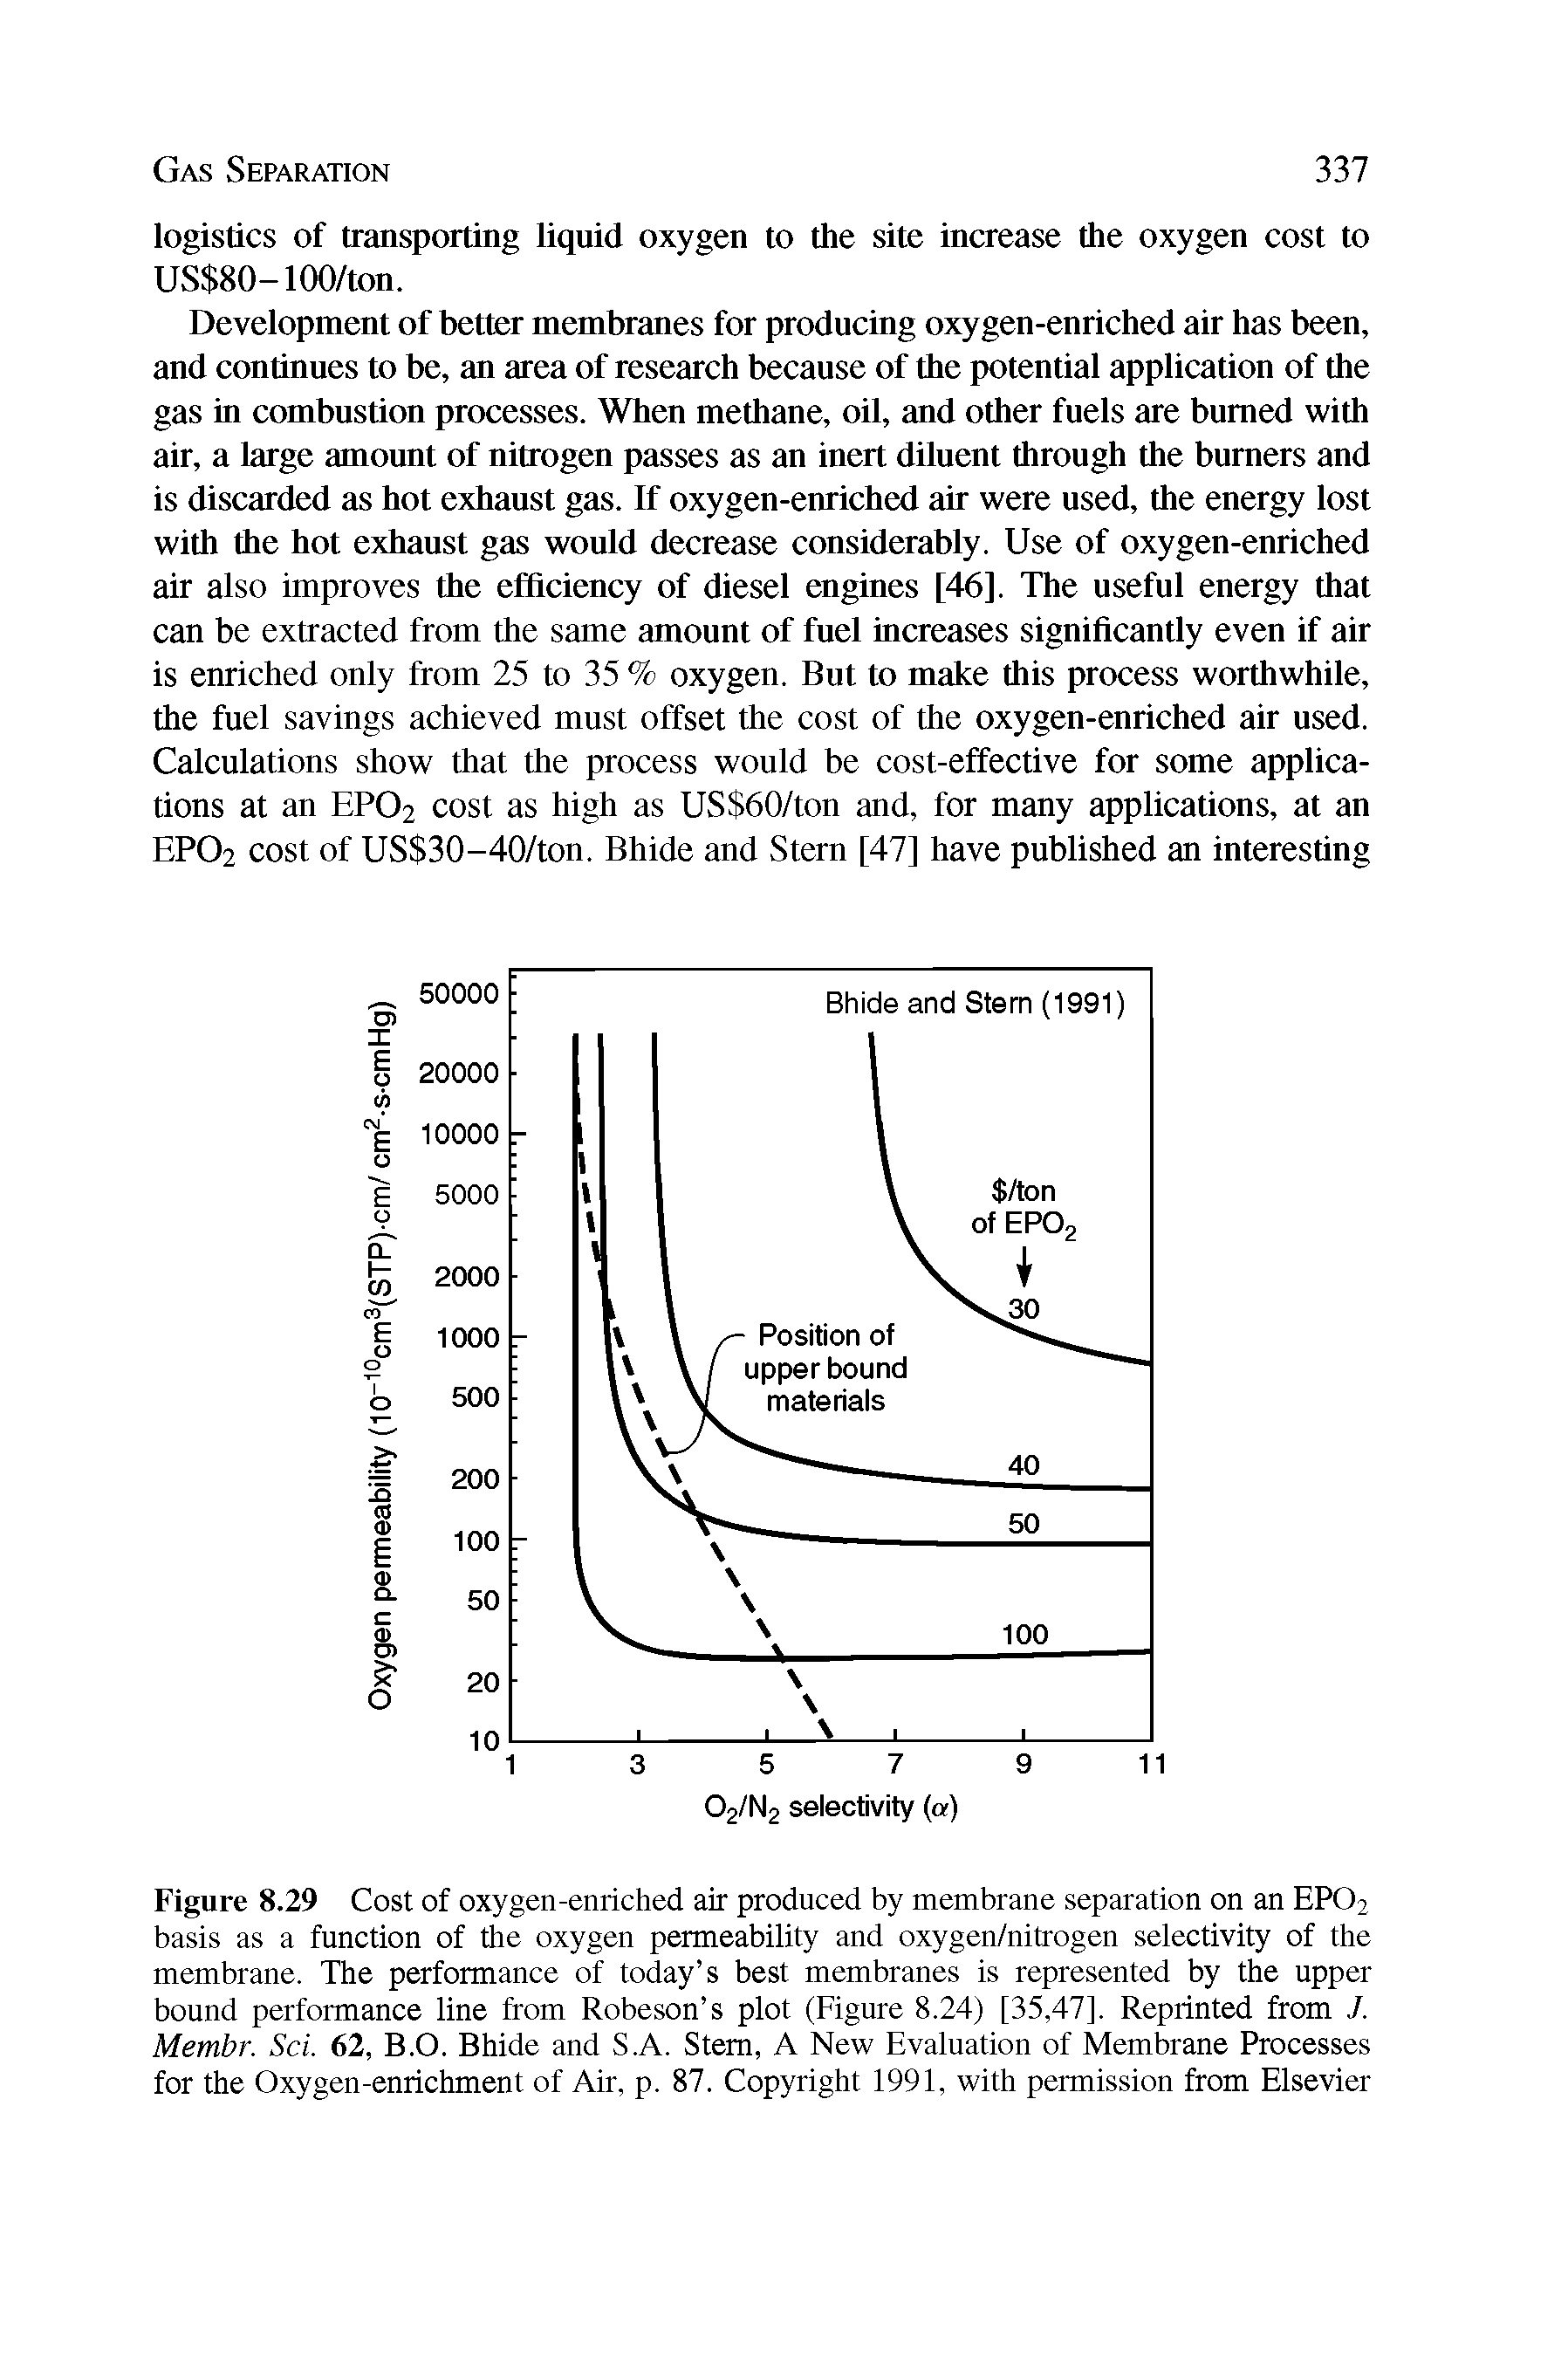 Figure 8.29 Cost of oxygen-enriched air produced by membrane separation on an EP02 basis as a function of the oxygen permeability and oxygen/nitrogen selectivity of the membrane. The performance of today s best membranes is represented by the upper bound performance line from Robeson s plot (Figure 8.24) [35,47]. Reprinted from J. Membr. Sci. 62, B.O. Bhide and S.A. Stem, A New Evaluation of Membrane Processes for the Oxygen-enrichment of Air, p. 87. Copyright 1991, with permission from Elsevier...